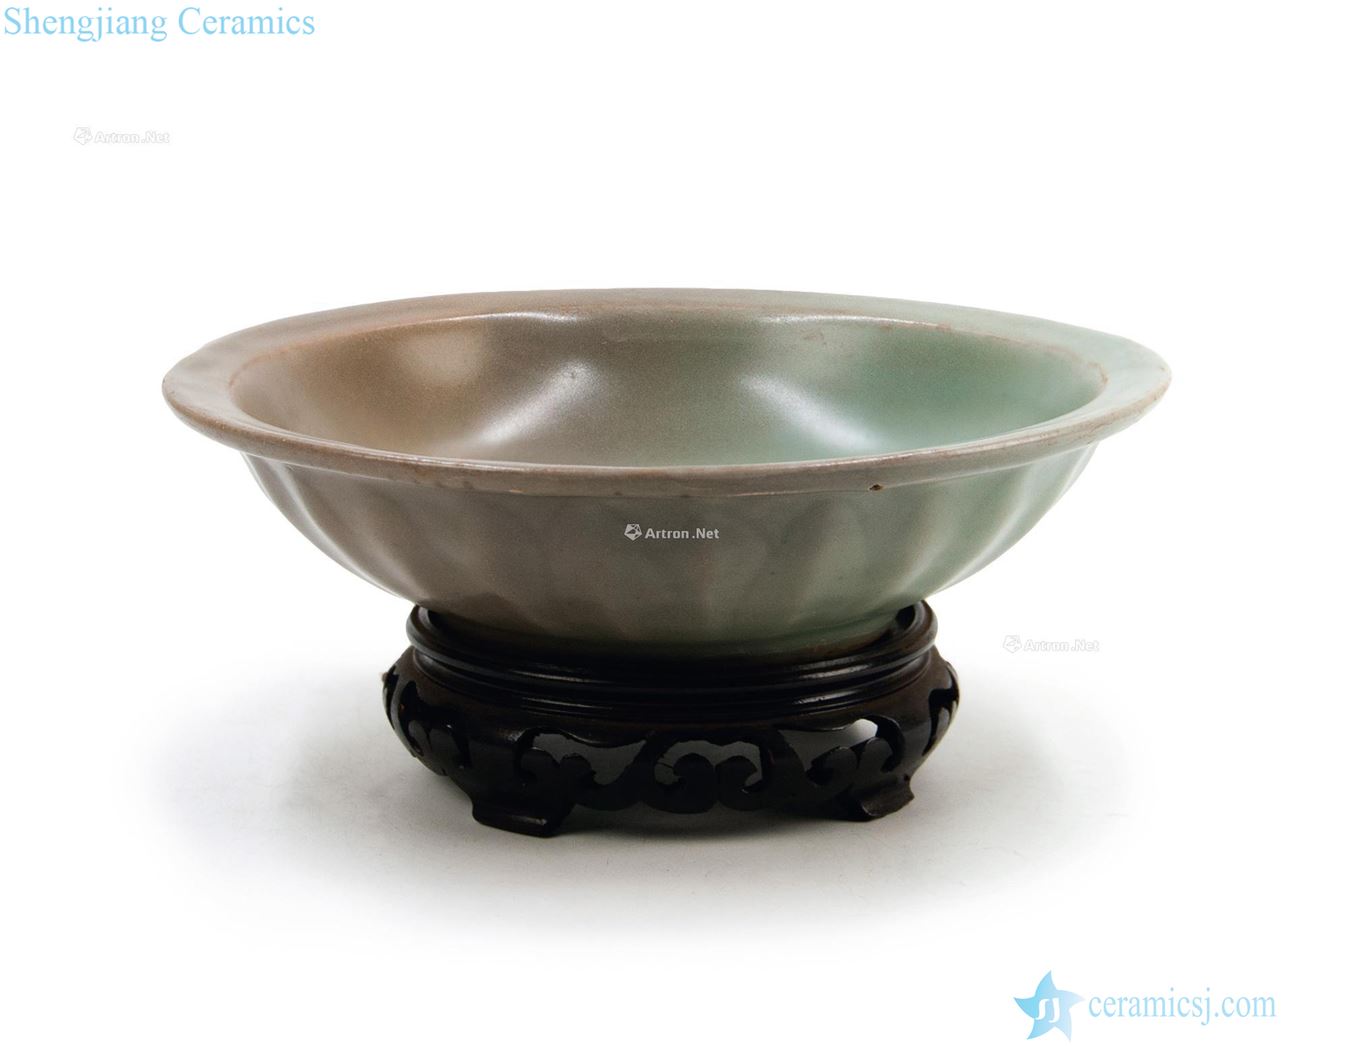 The song dynasty Printed longquan celadon bowls